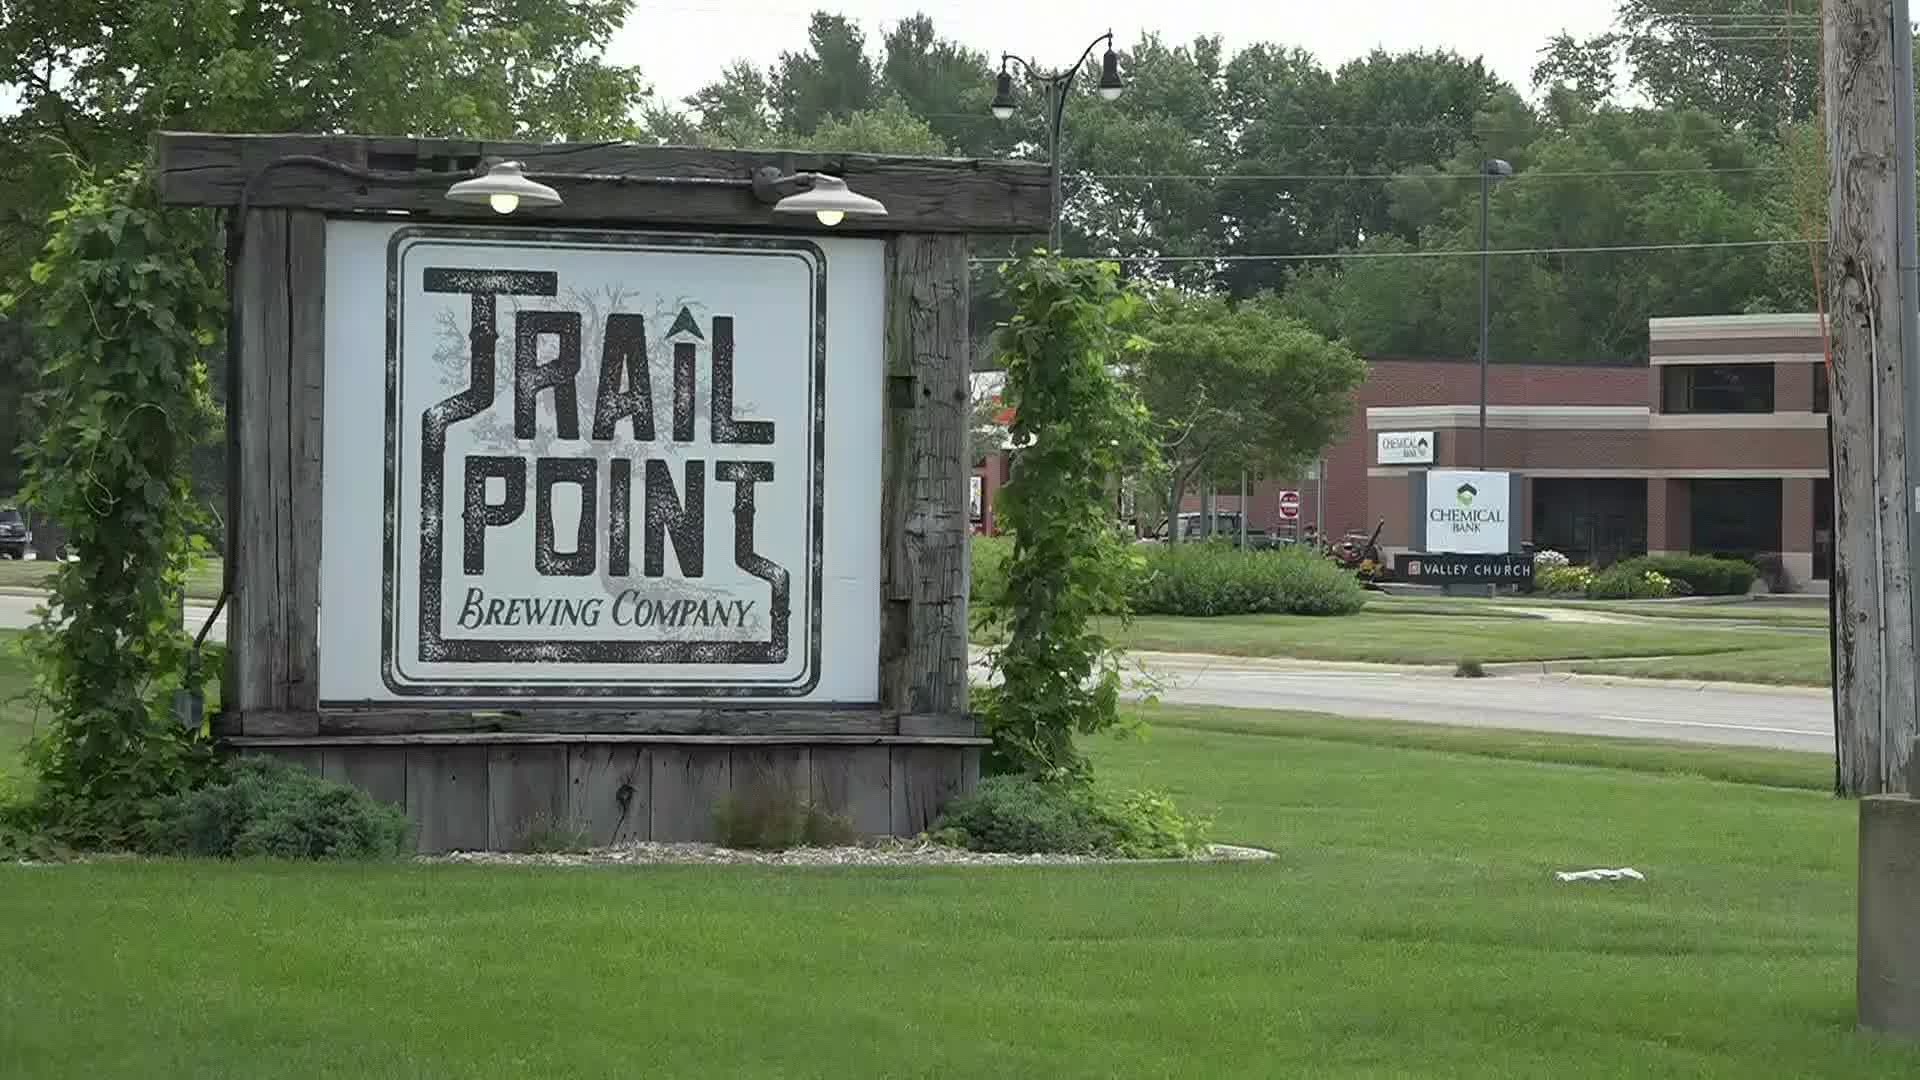 Trailpoint closed when an employee got sick, before even knowing if the test was negative or positive. They say that extra precaution is necessary.